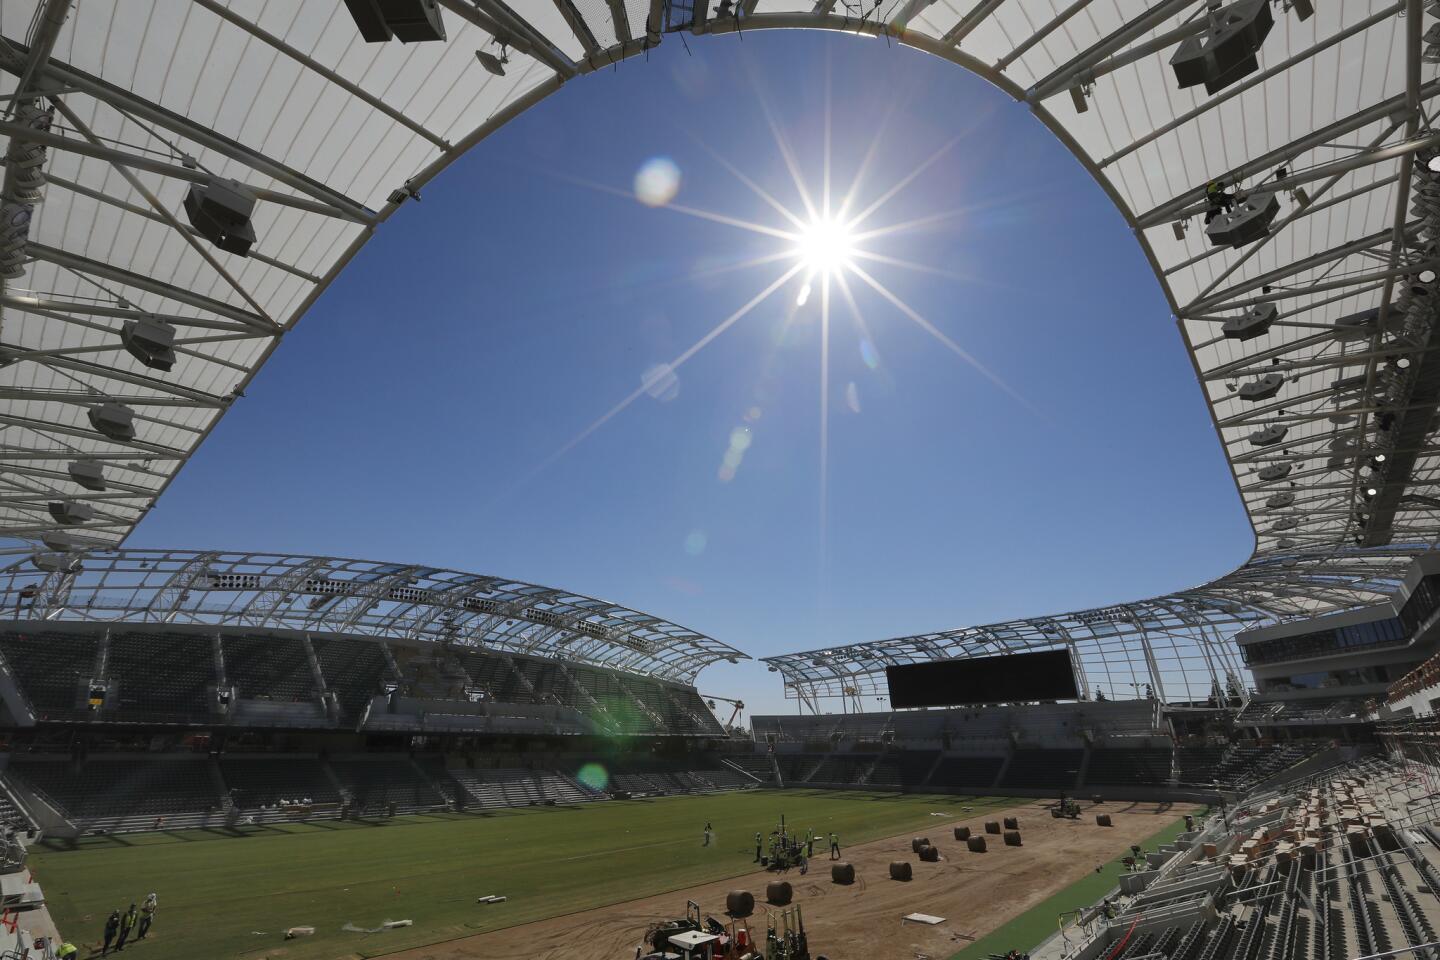 Construction workers put in new grass as they put the finishing touches on LAFC's new Banc of California Stadium on Feb. 22.